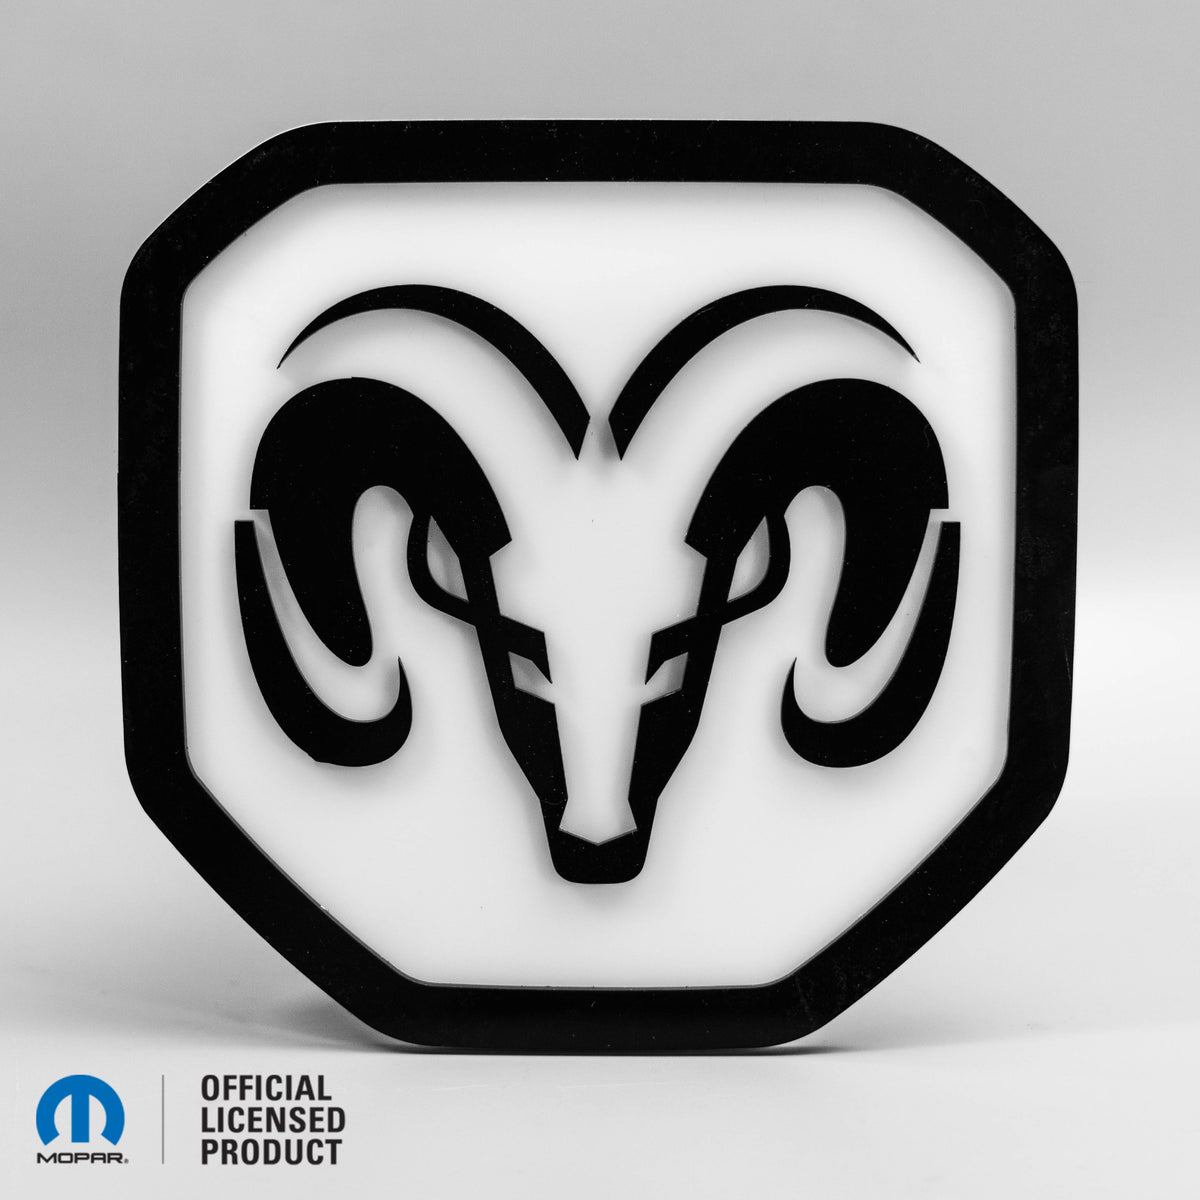 RAM® Head Logo Style 1 Tailgate Badge - Fits 2019+ RAM® Tailgate - 1500, 2500, 3500 - Gloss on White - Officially Licensed Product